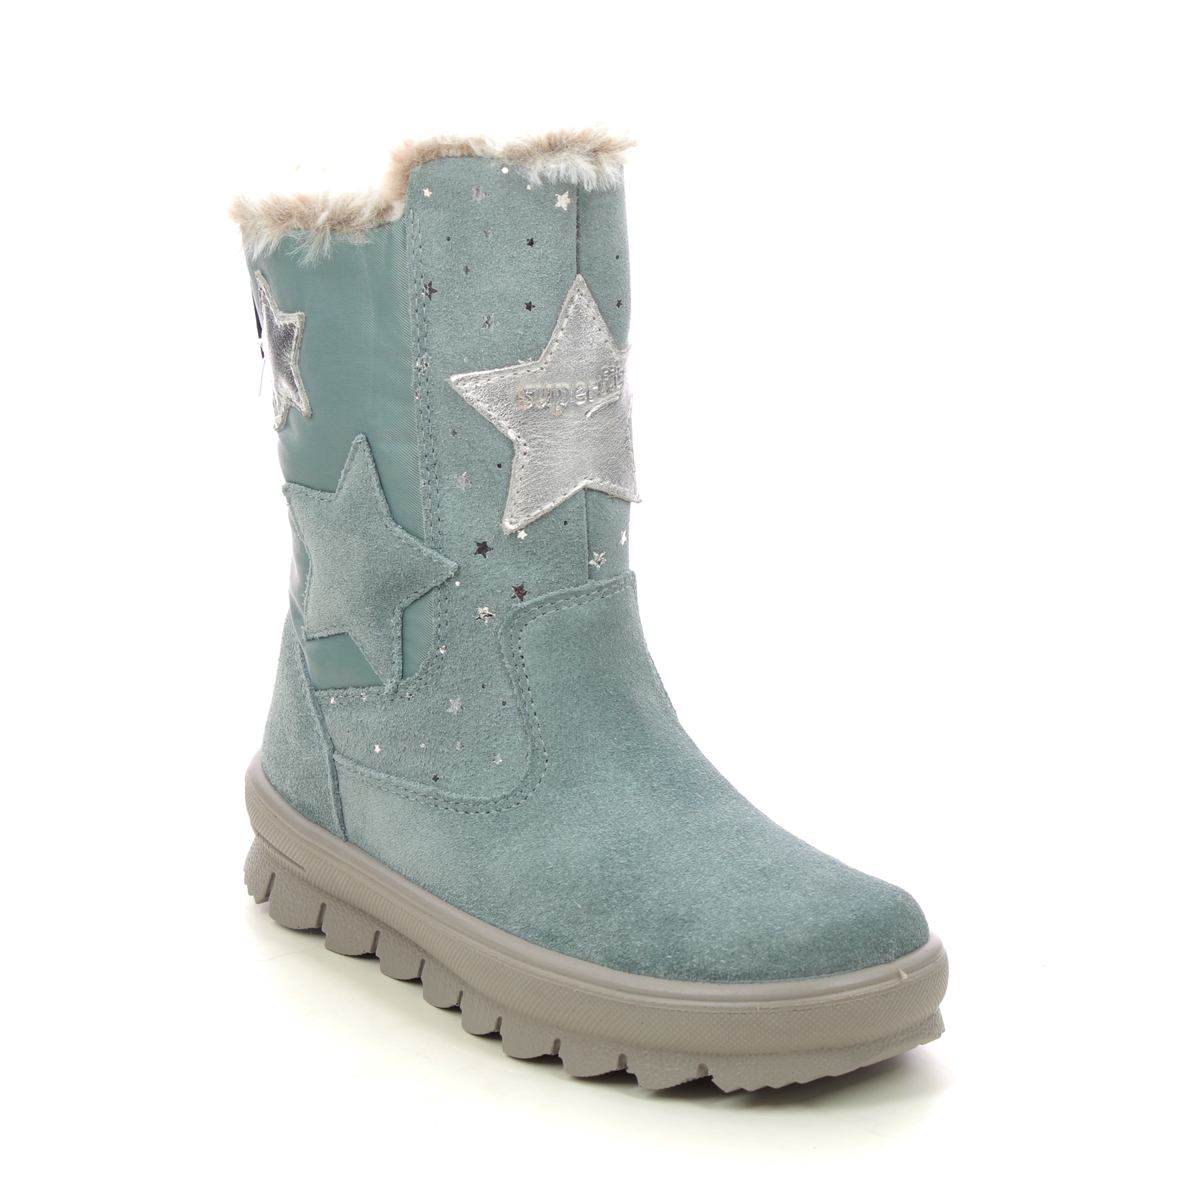 Superfit Flavia Star Gtx Blue Suede Kids Girls Boots 1000219-7500 In Size 32 In Plain Blue Suede For kids